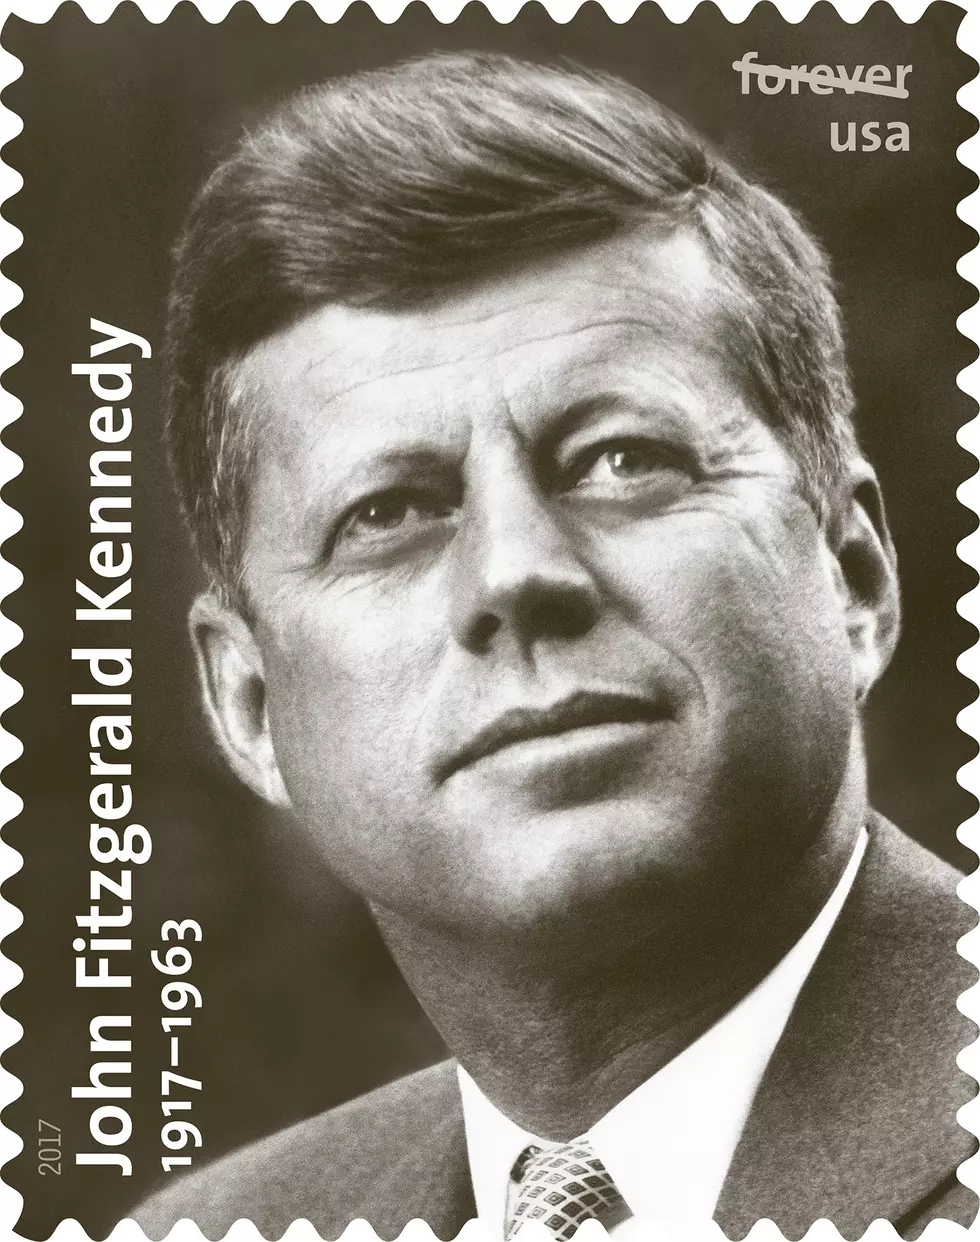 John F. Kennedy ‘Forever Stamp’ to be dedicated on President’s Day Monday